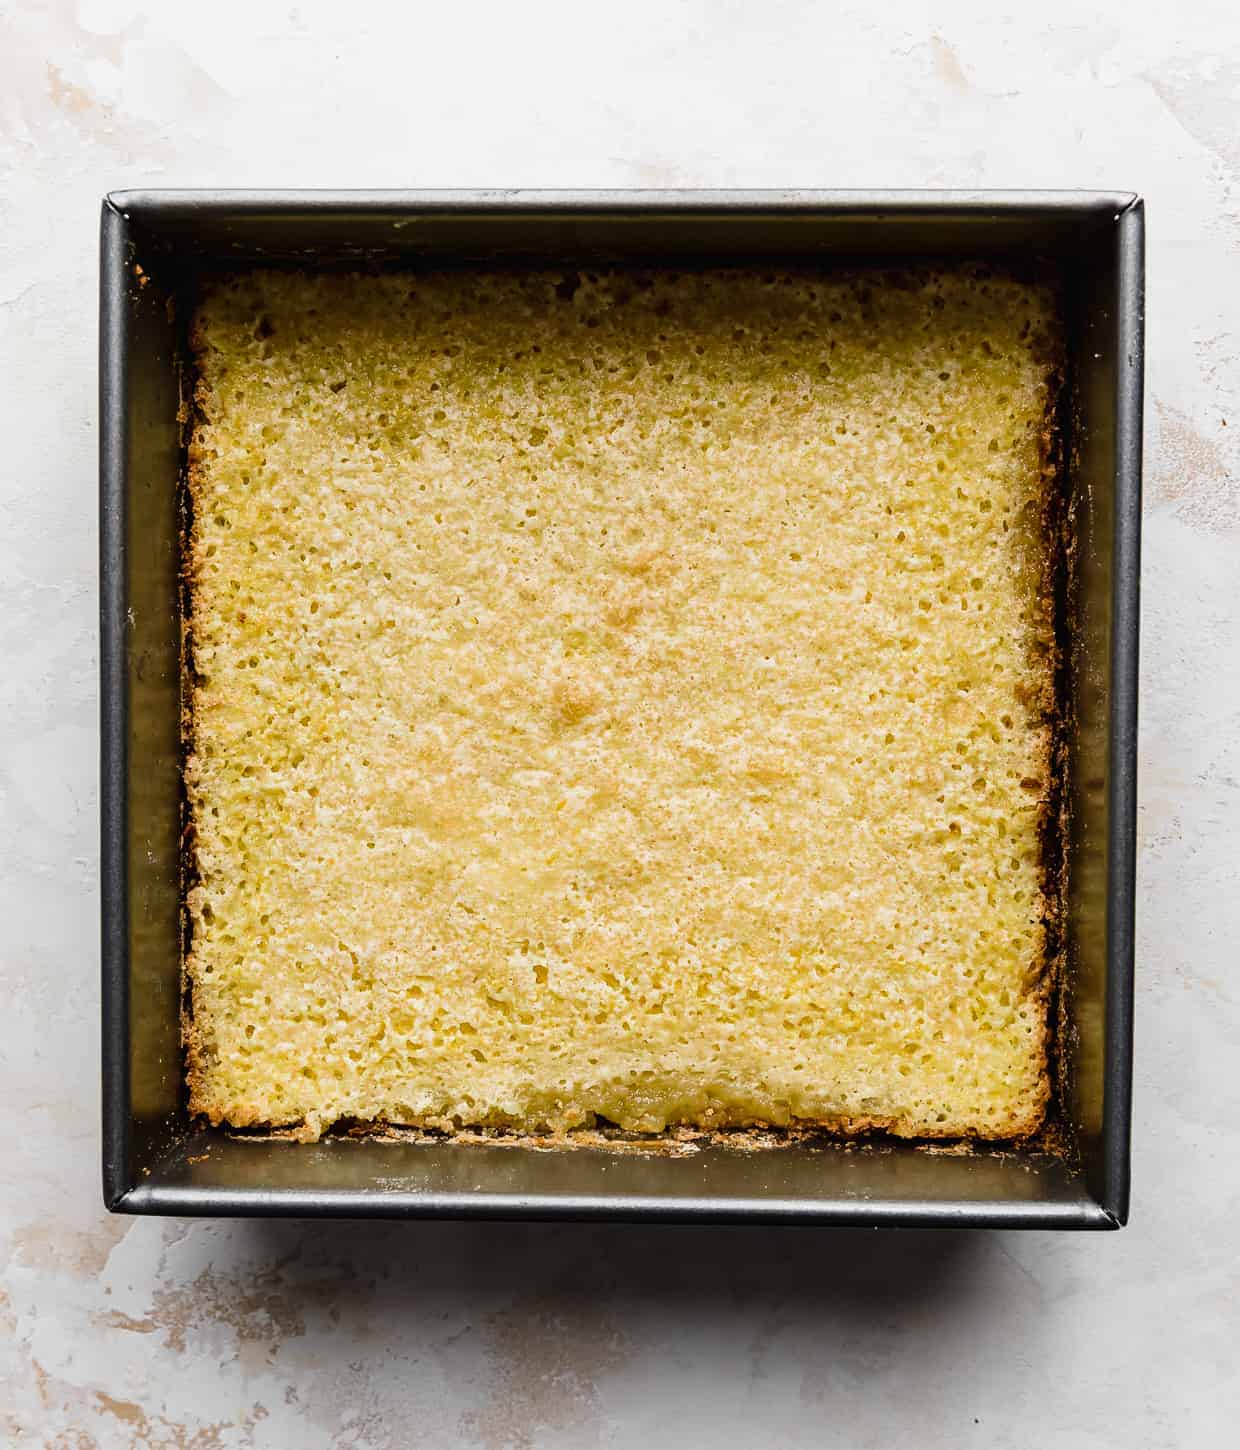 A square pan with baked yellow lemon bars in it, against a white and cream colored background.